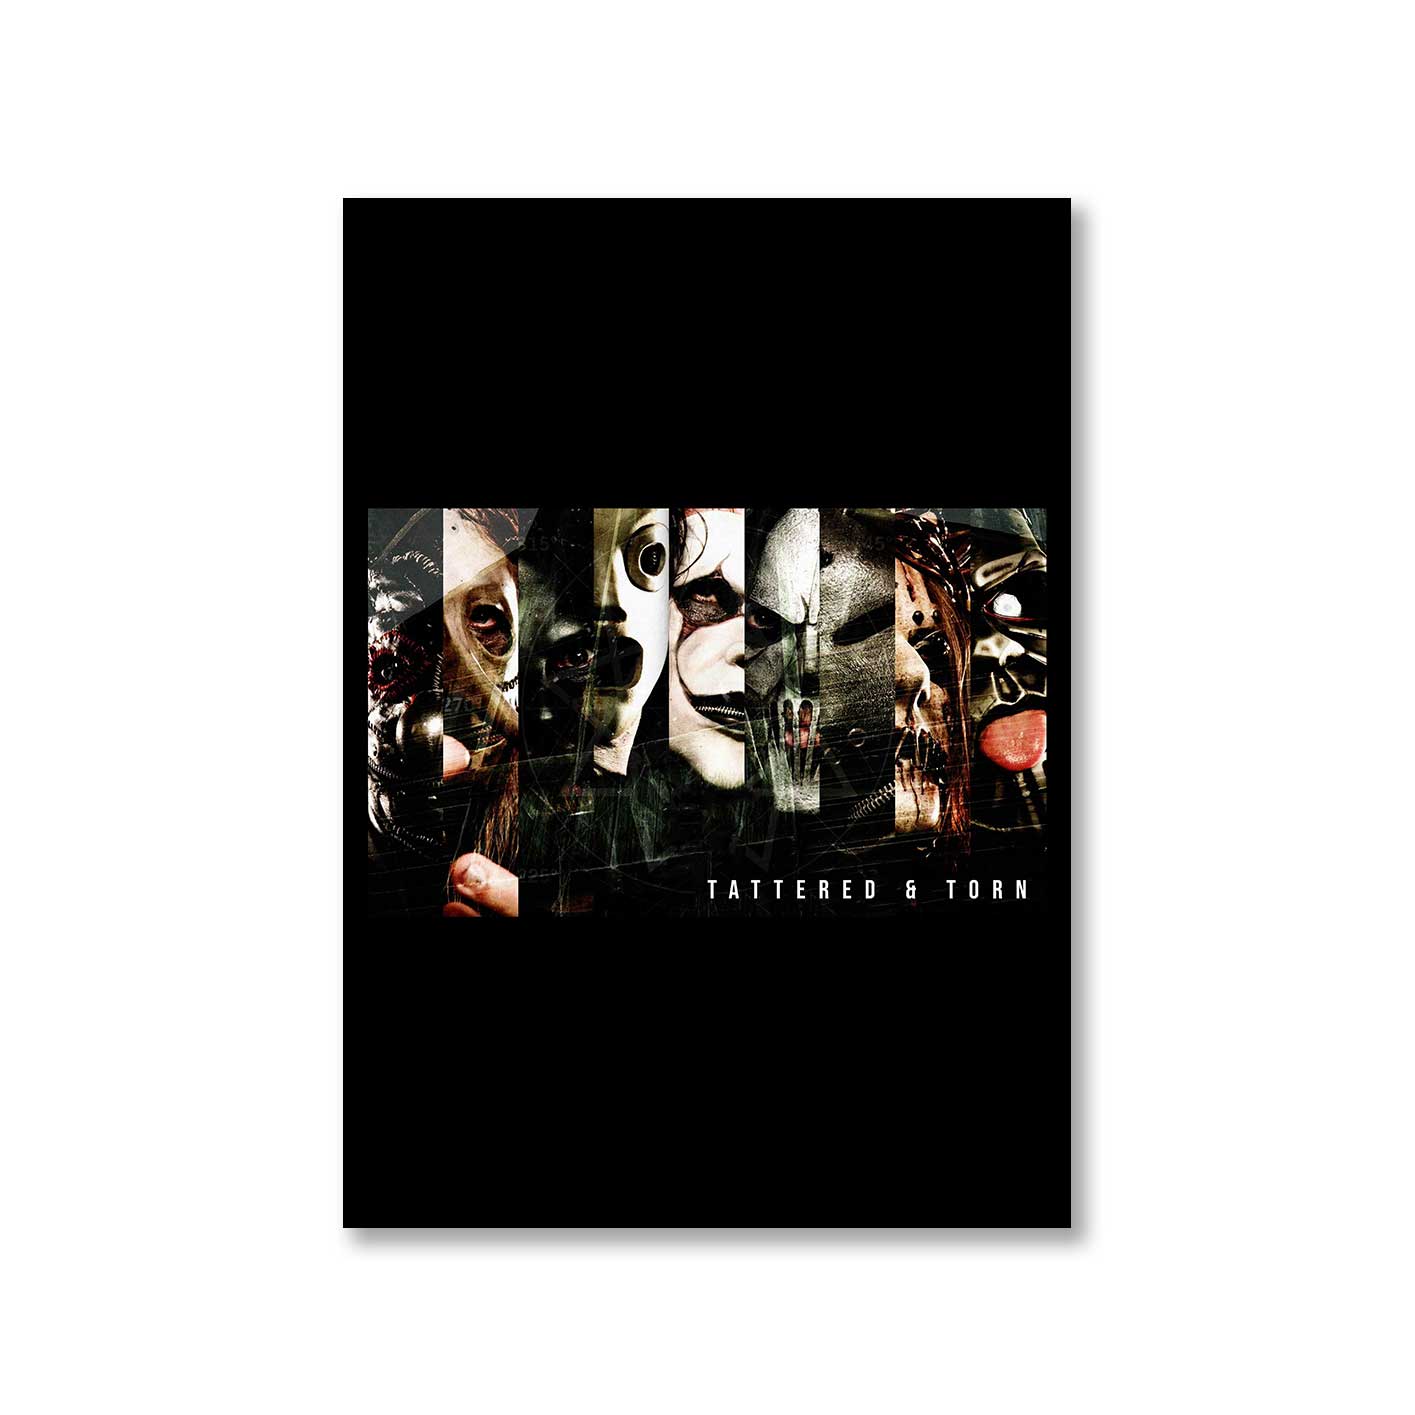 slipknot tattered and torn poster wall art buy online united states of america usa the banyan tee tbt a4